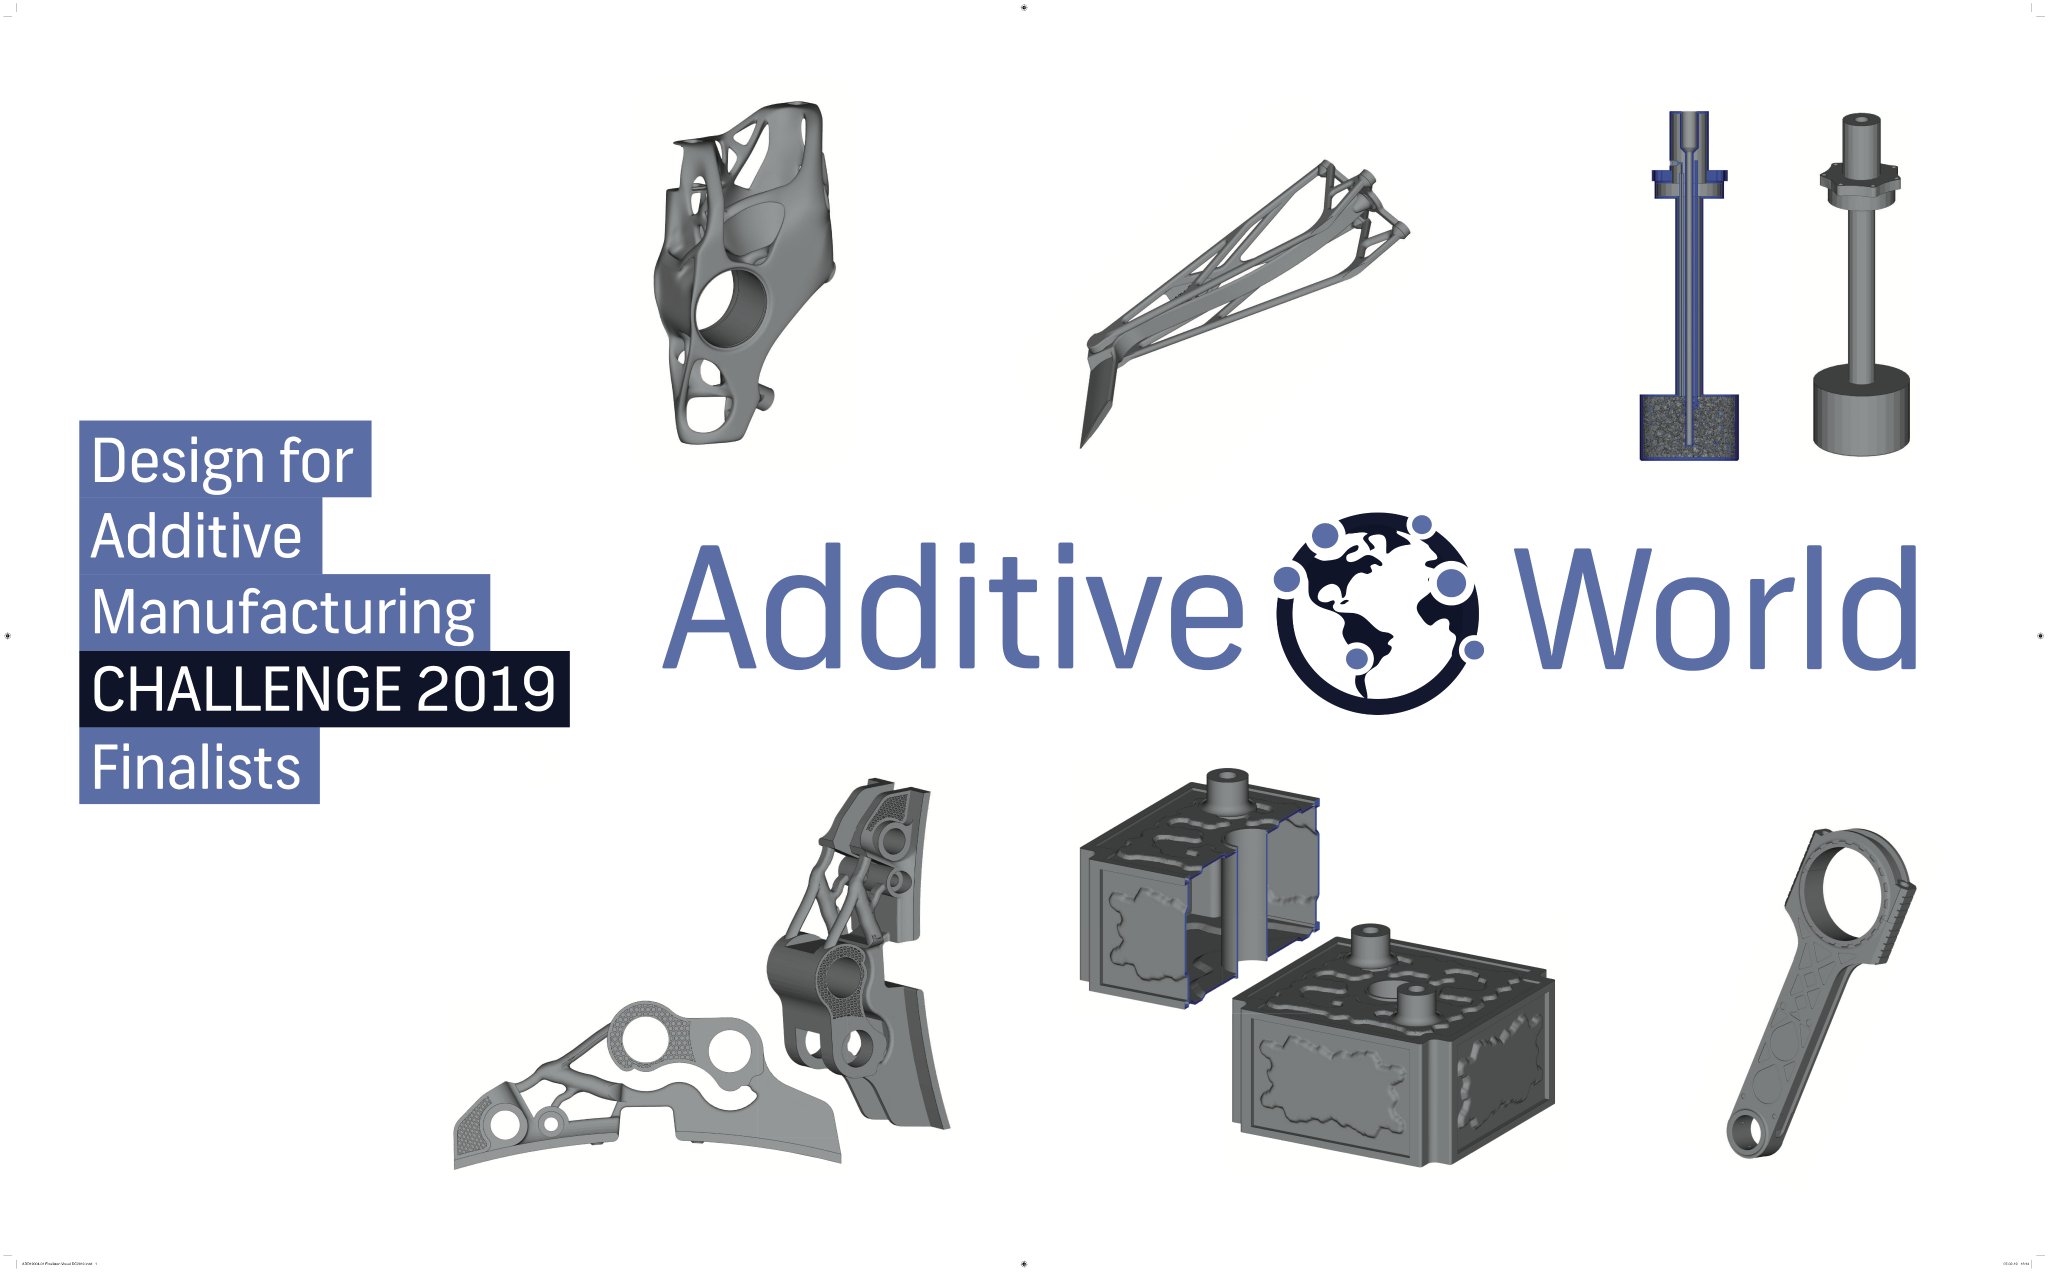 Redesigns of the finalists for the Additive World Design for Additive Manufacturing Challenge 2019. Image via Additive Industries.